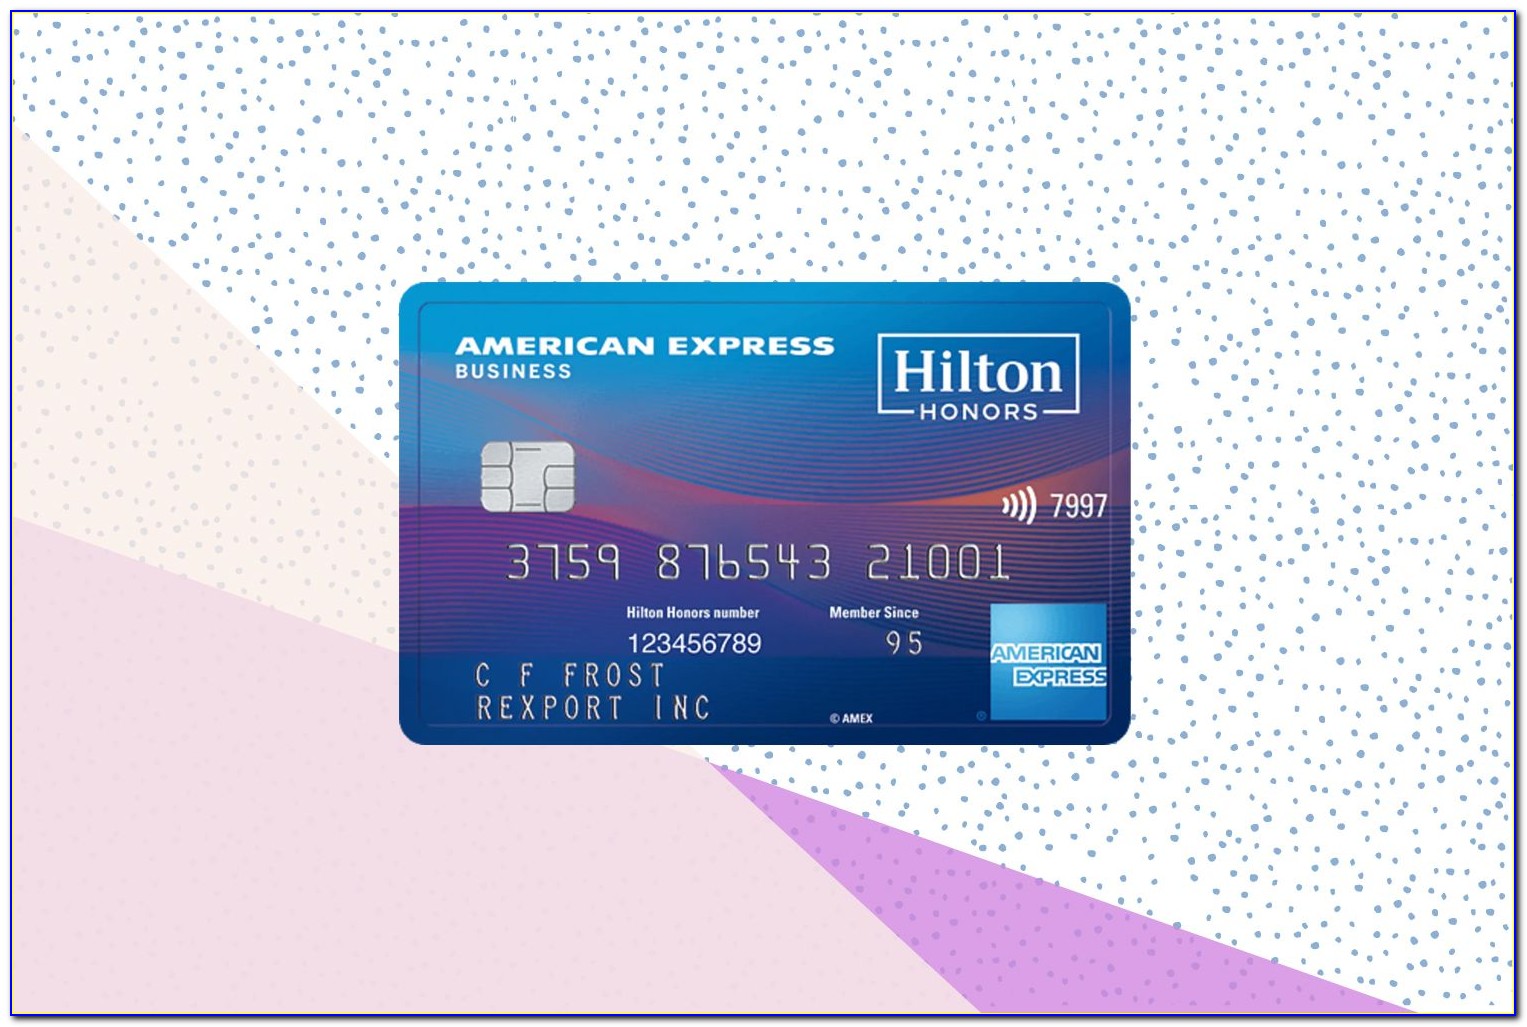 Hilton Honors Business Card Free Night